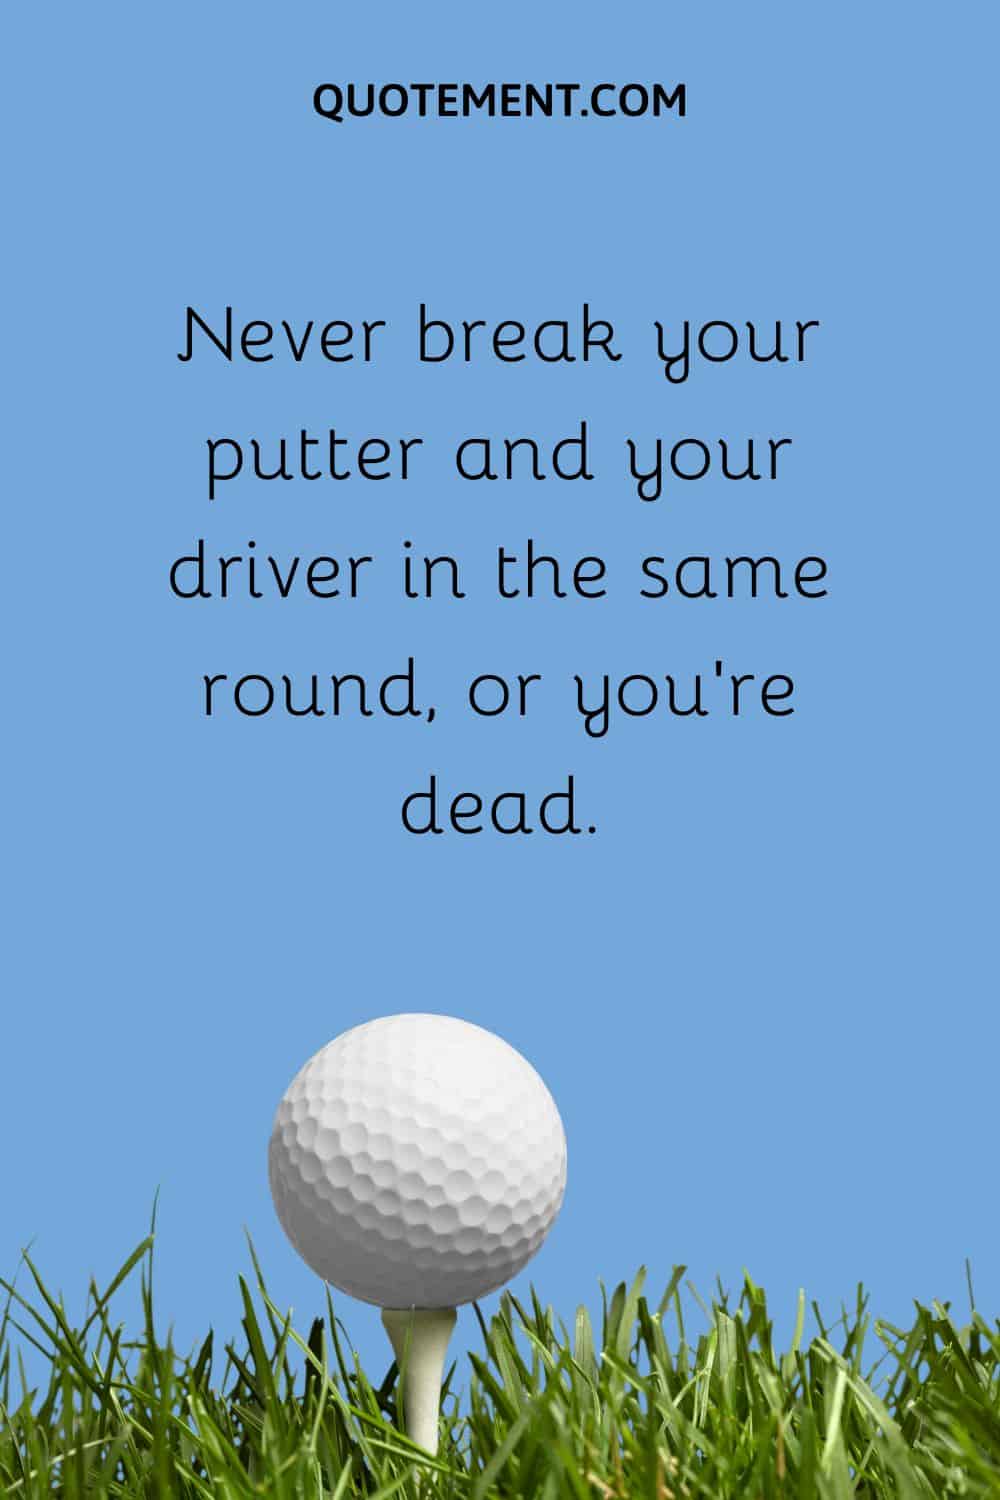 Never break your putter and your driver in the same round, or you’re dead.